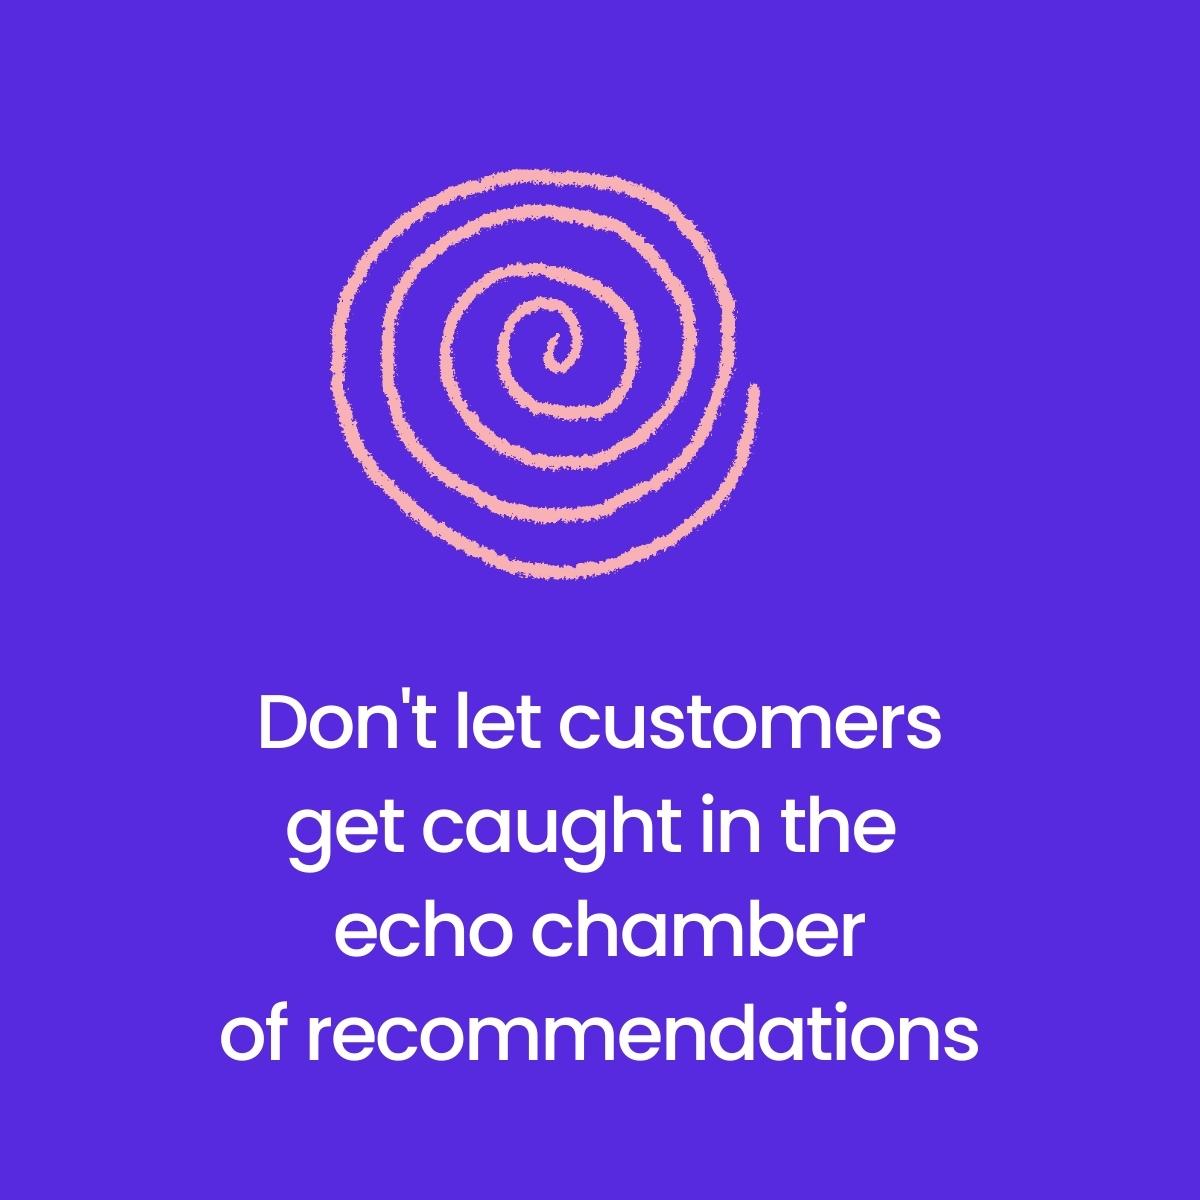 A spiral with text "not to get caught in echo chambers of recommendations" underneath